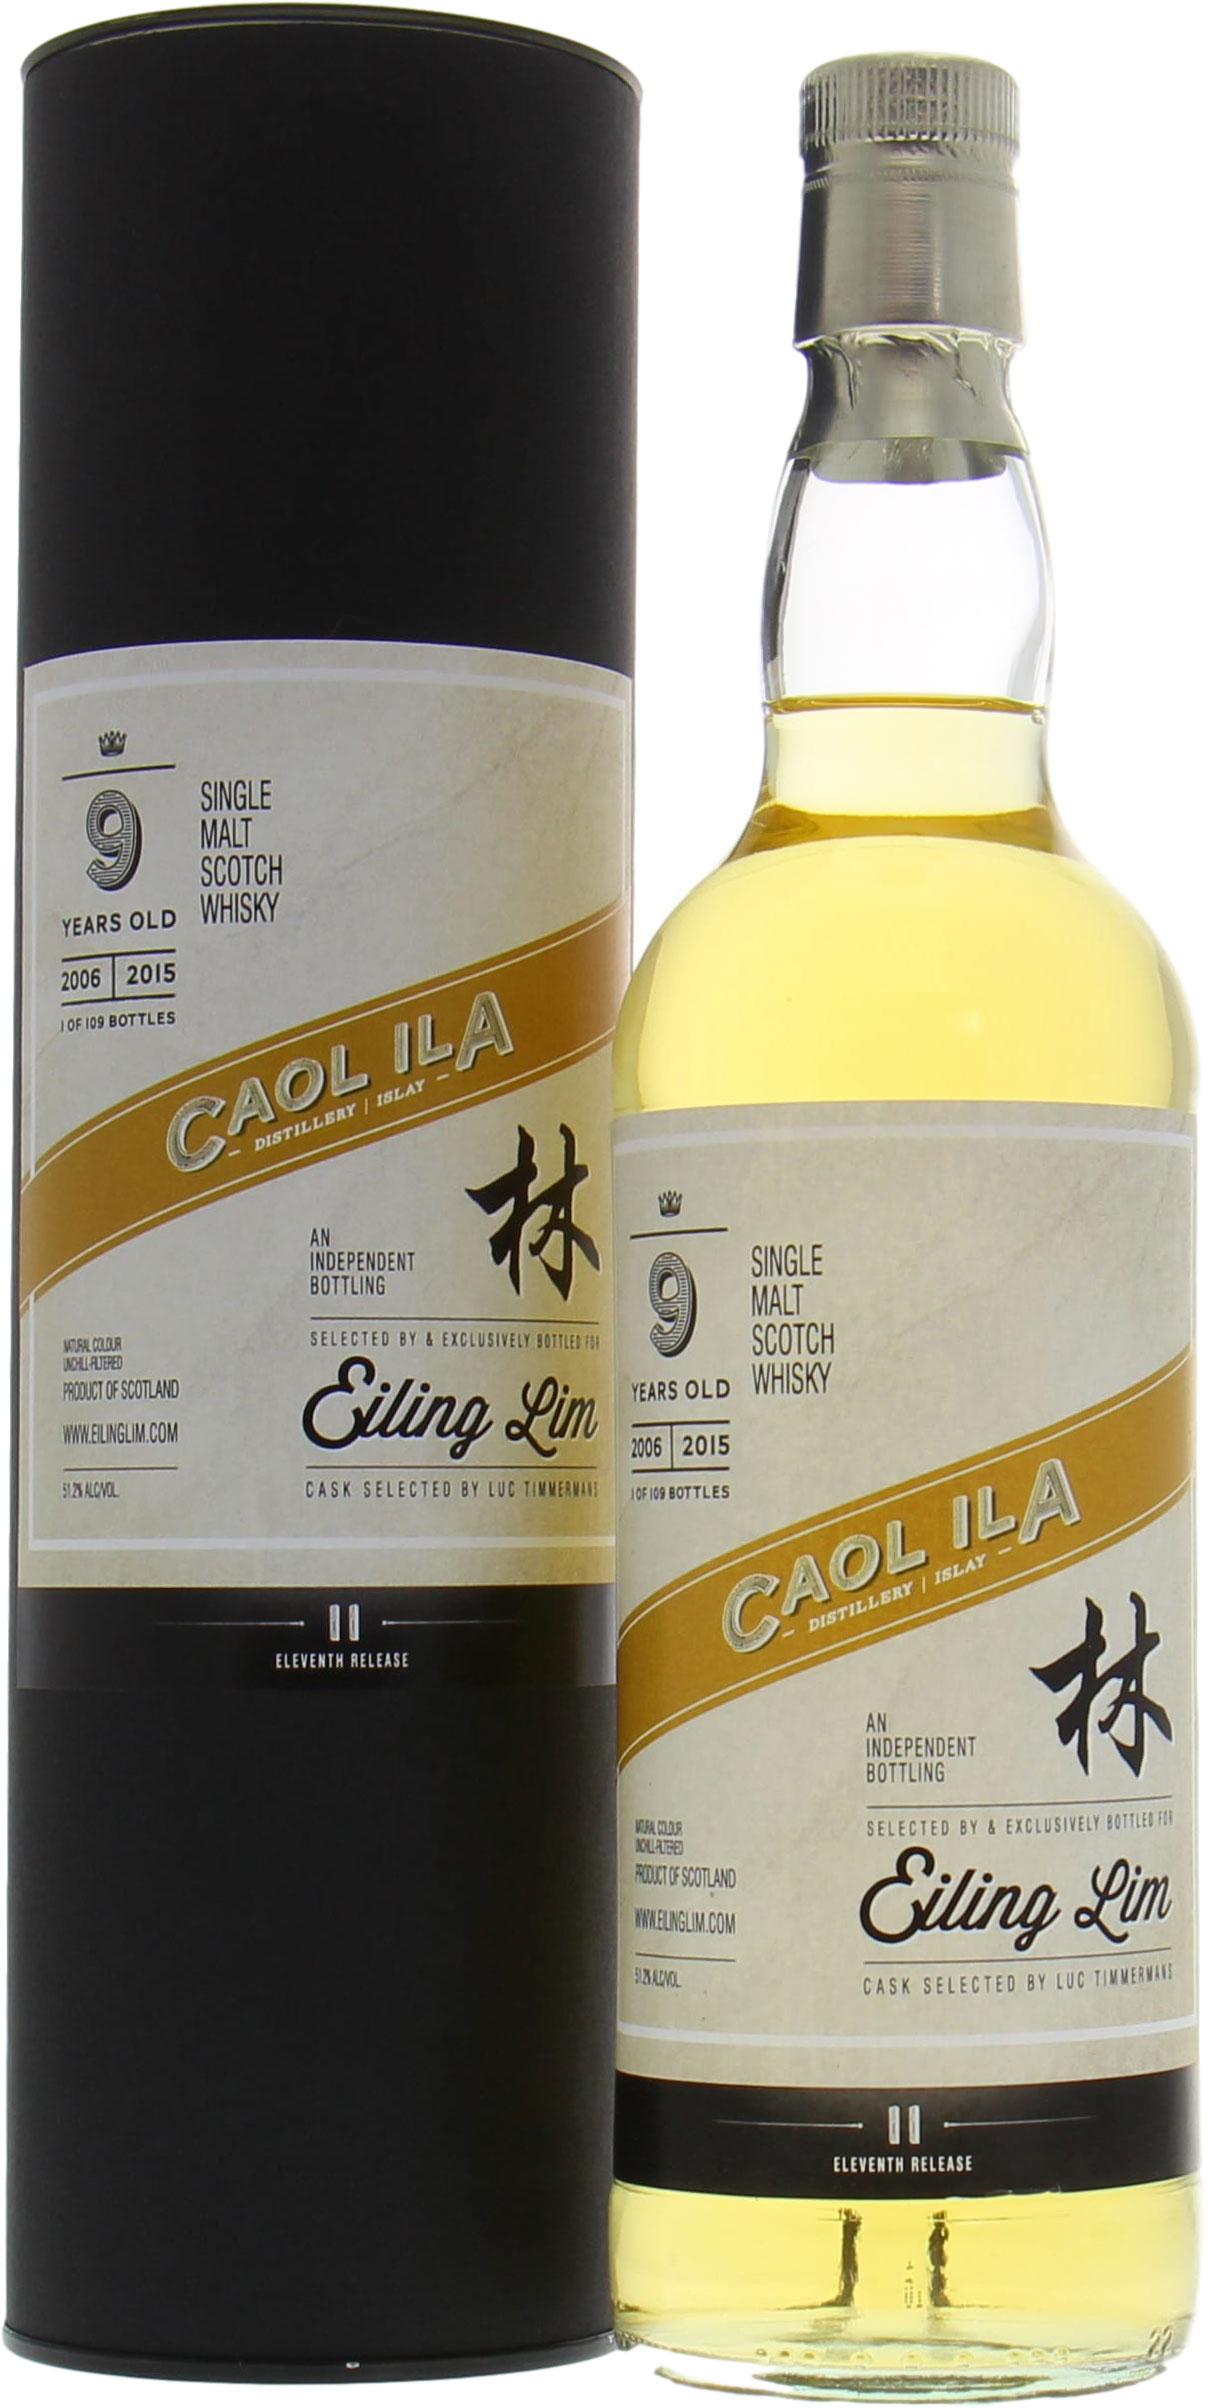 Caol Ila - 9 Years Old Eiling Lim 11th Release 51.2% 2006